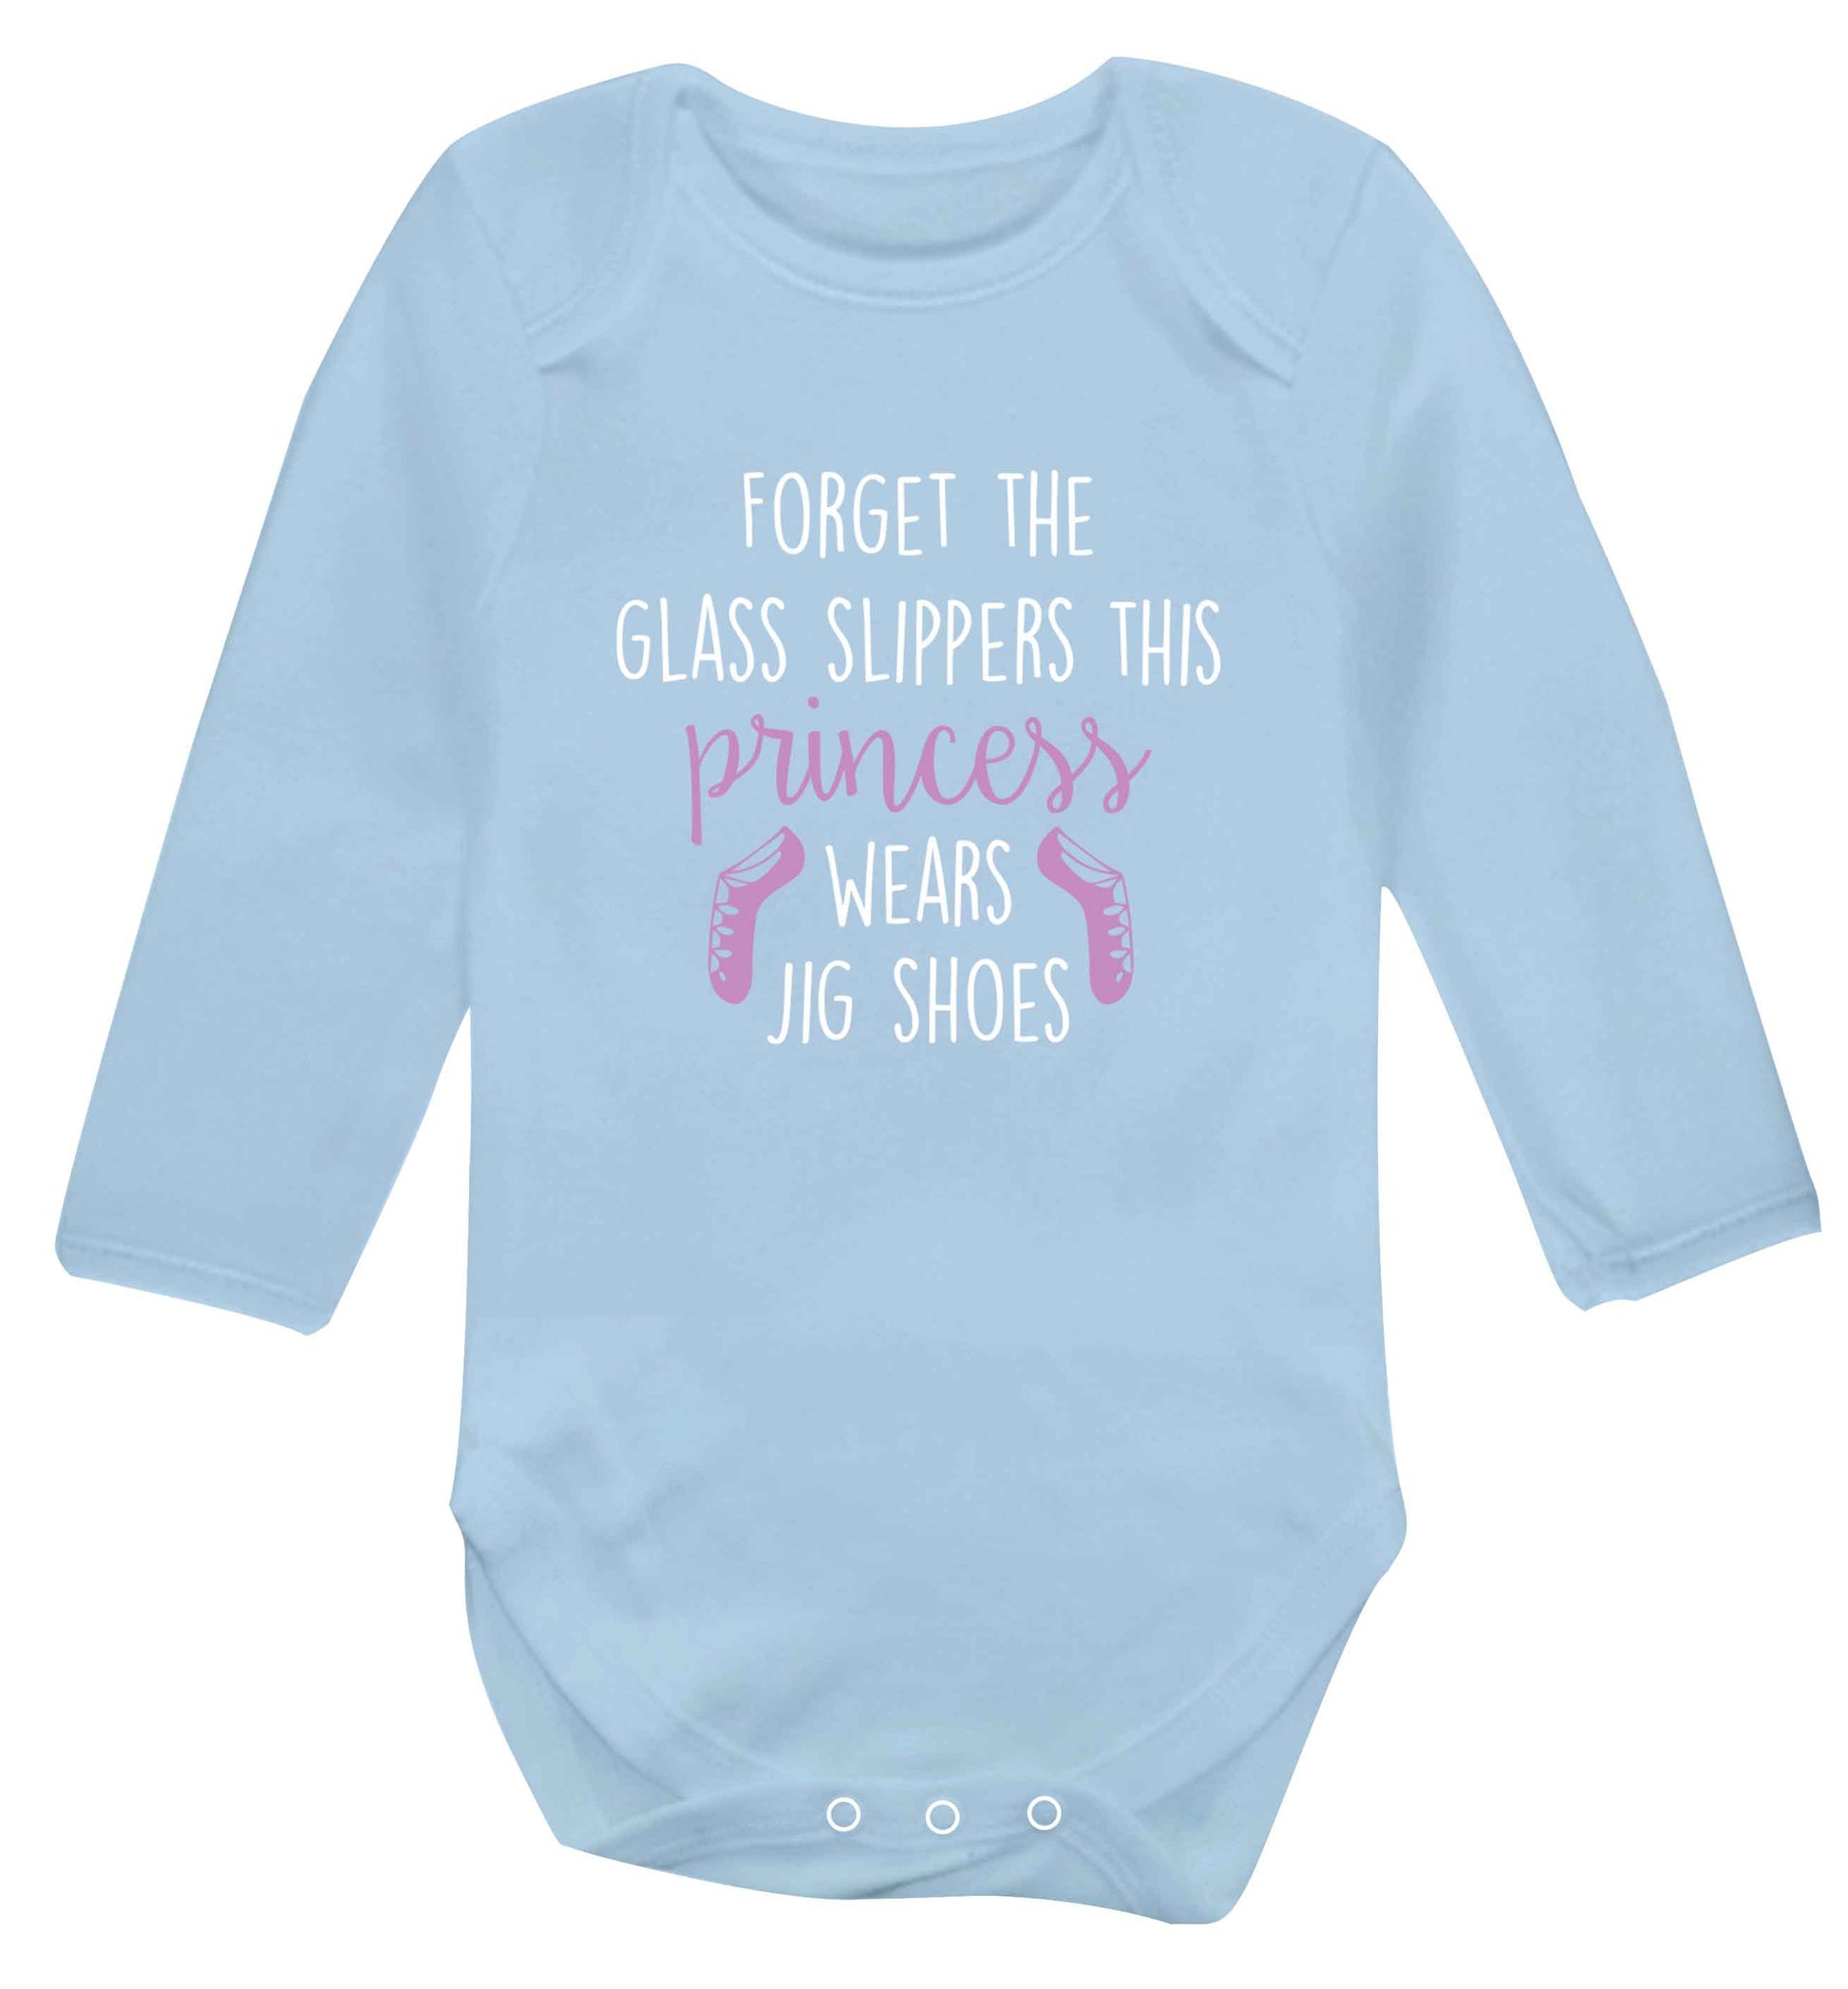 This princess wears jig shoes baby vest long sleeved pale blue 6-12 months